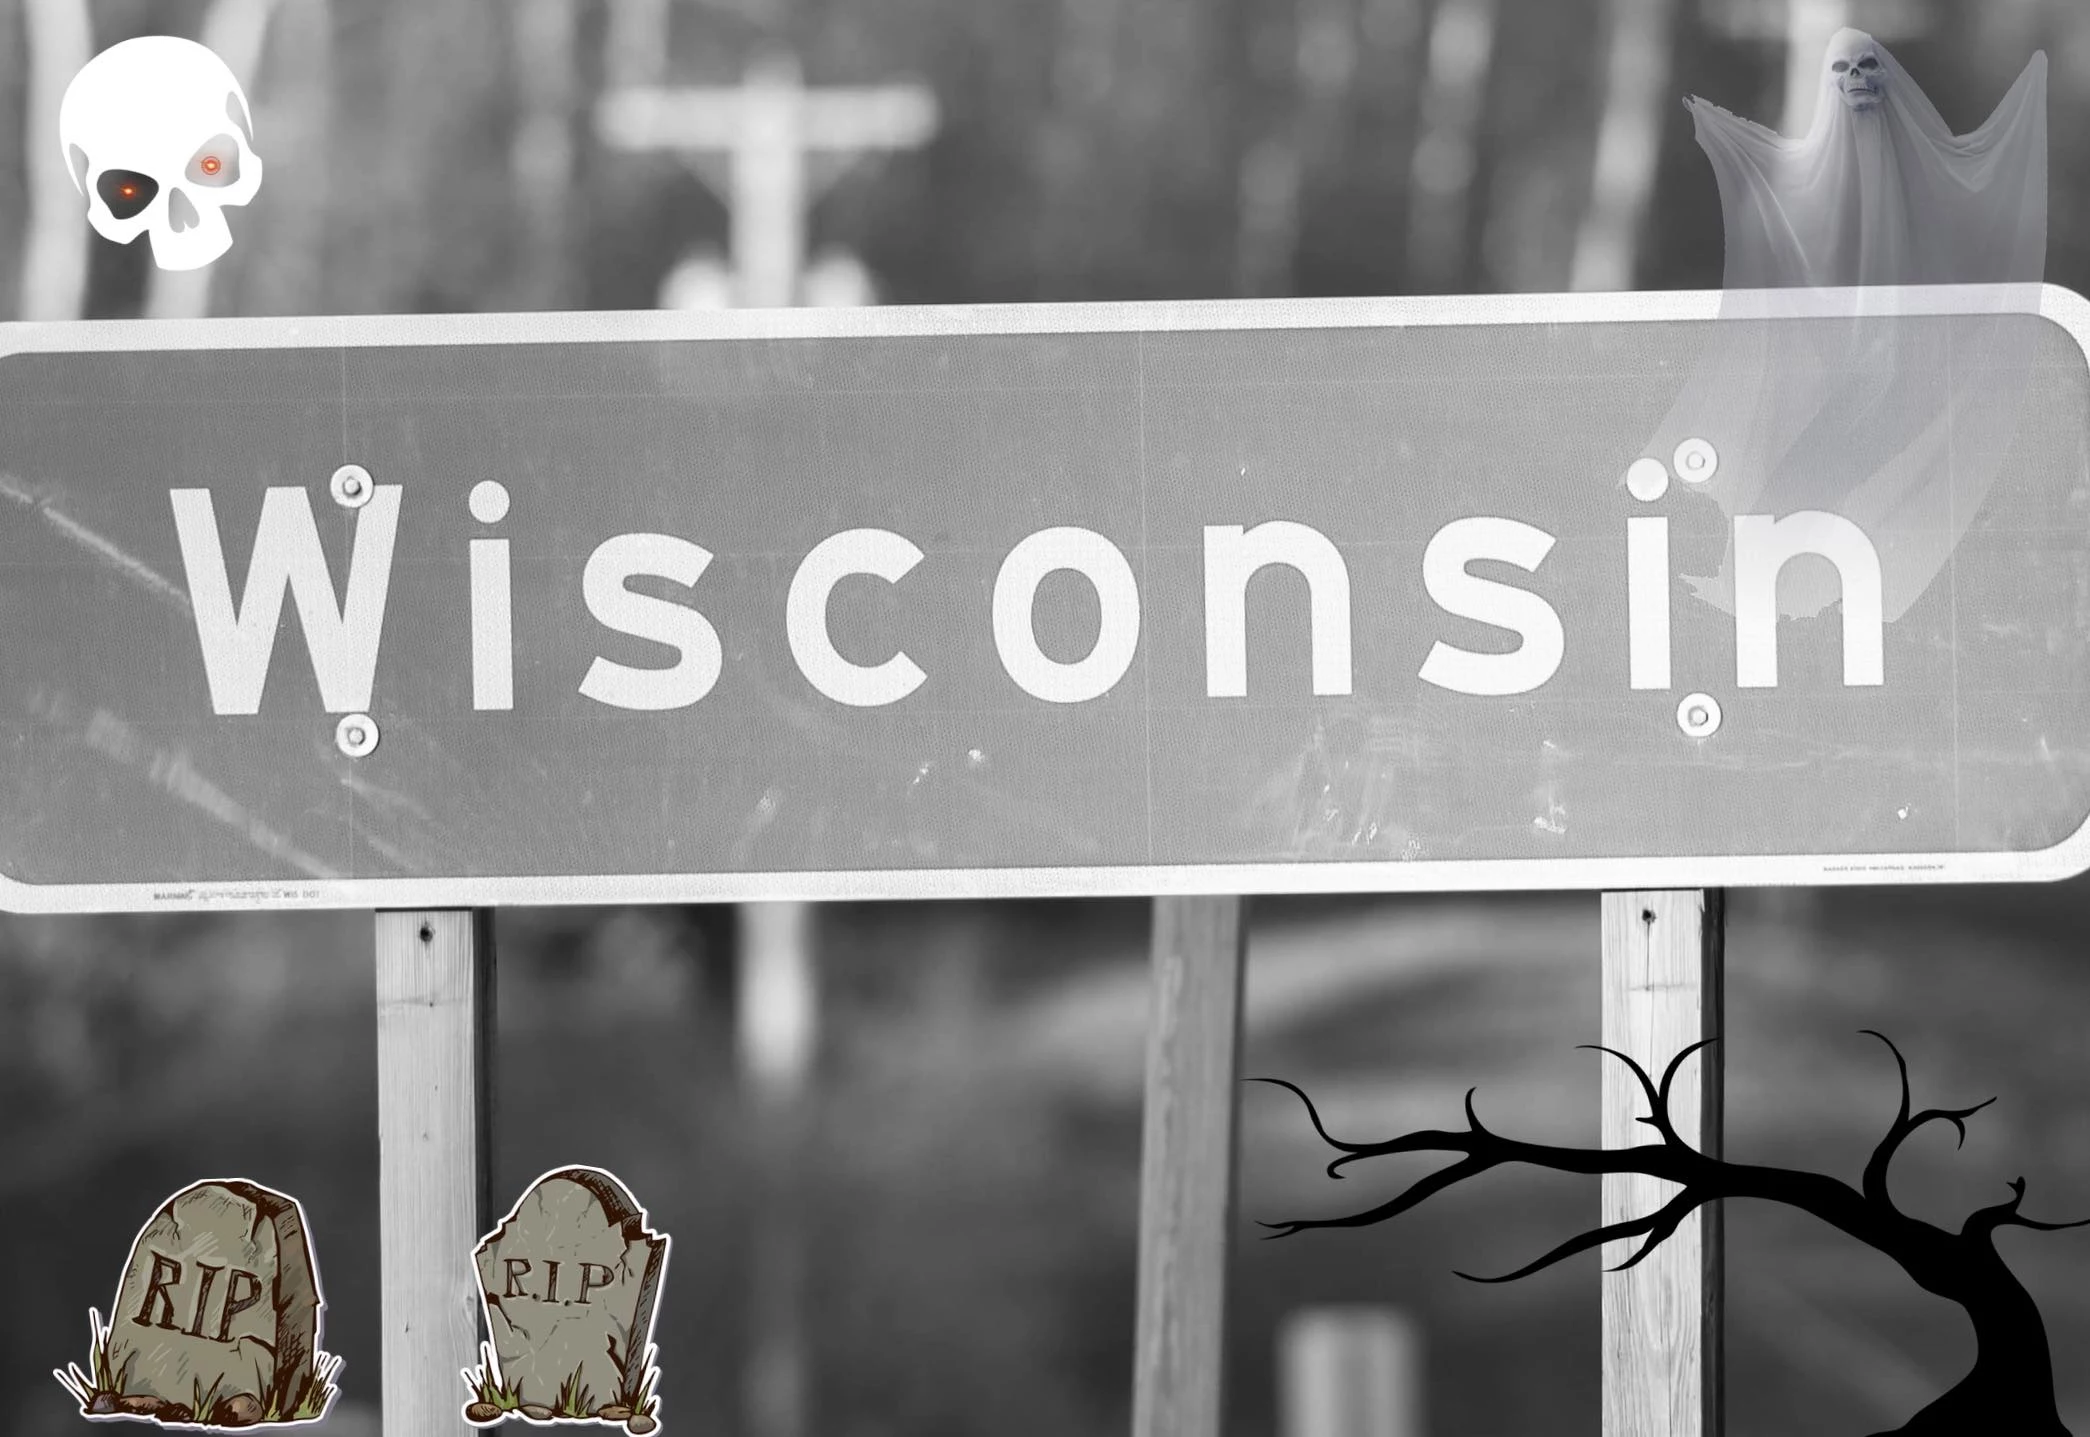 Check Out These 5 Iconic Urban Legends In Wisconsinloading...loading...loading...